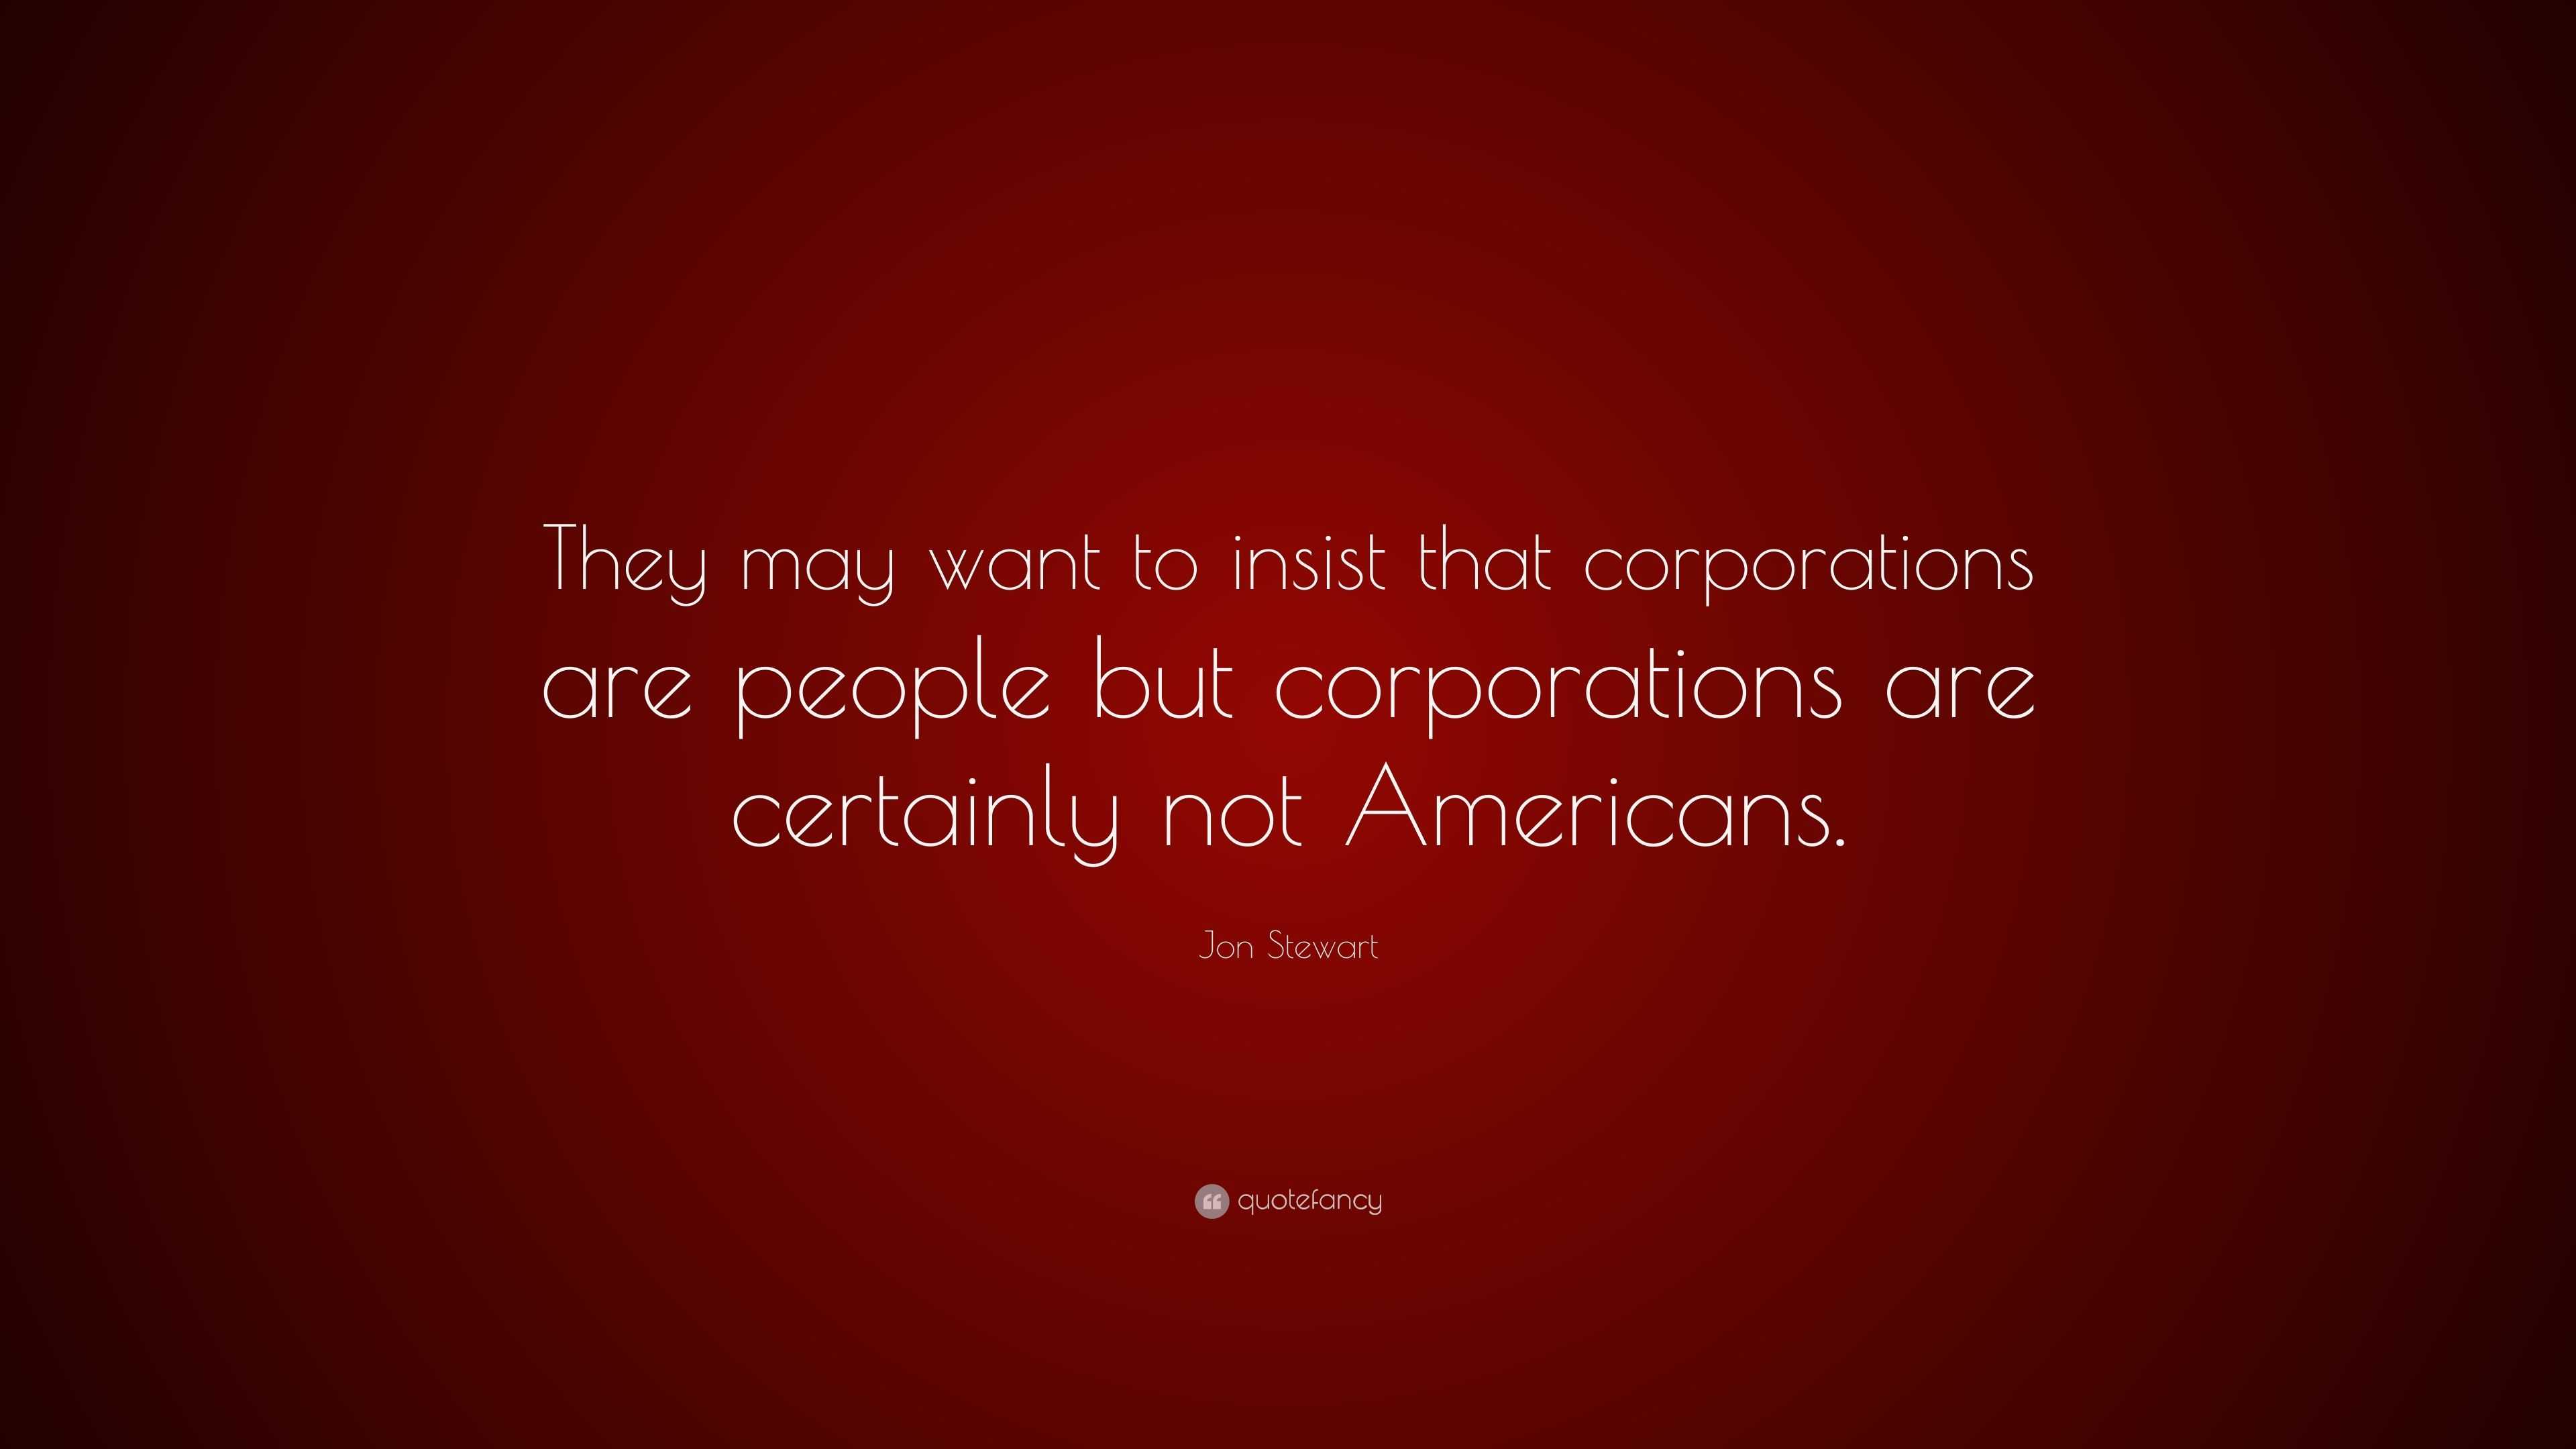 Jon Stewart Quote: “They may want to insist that corporations are ...